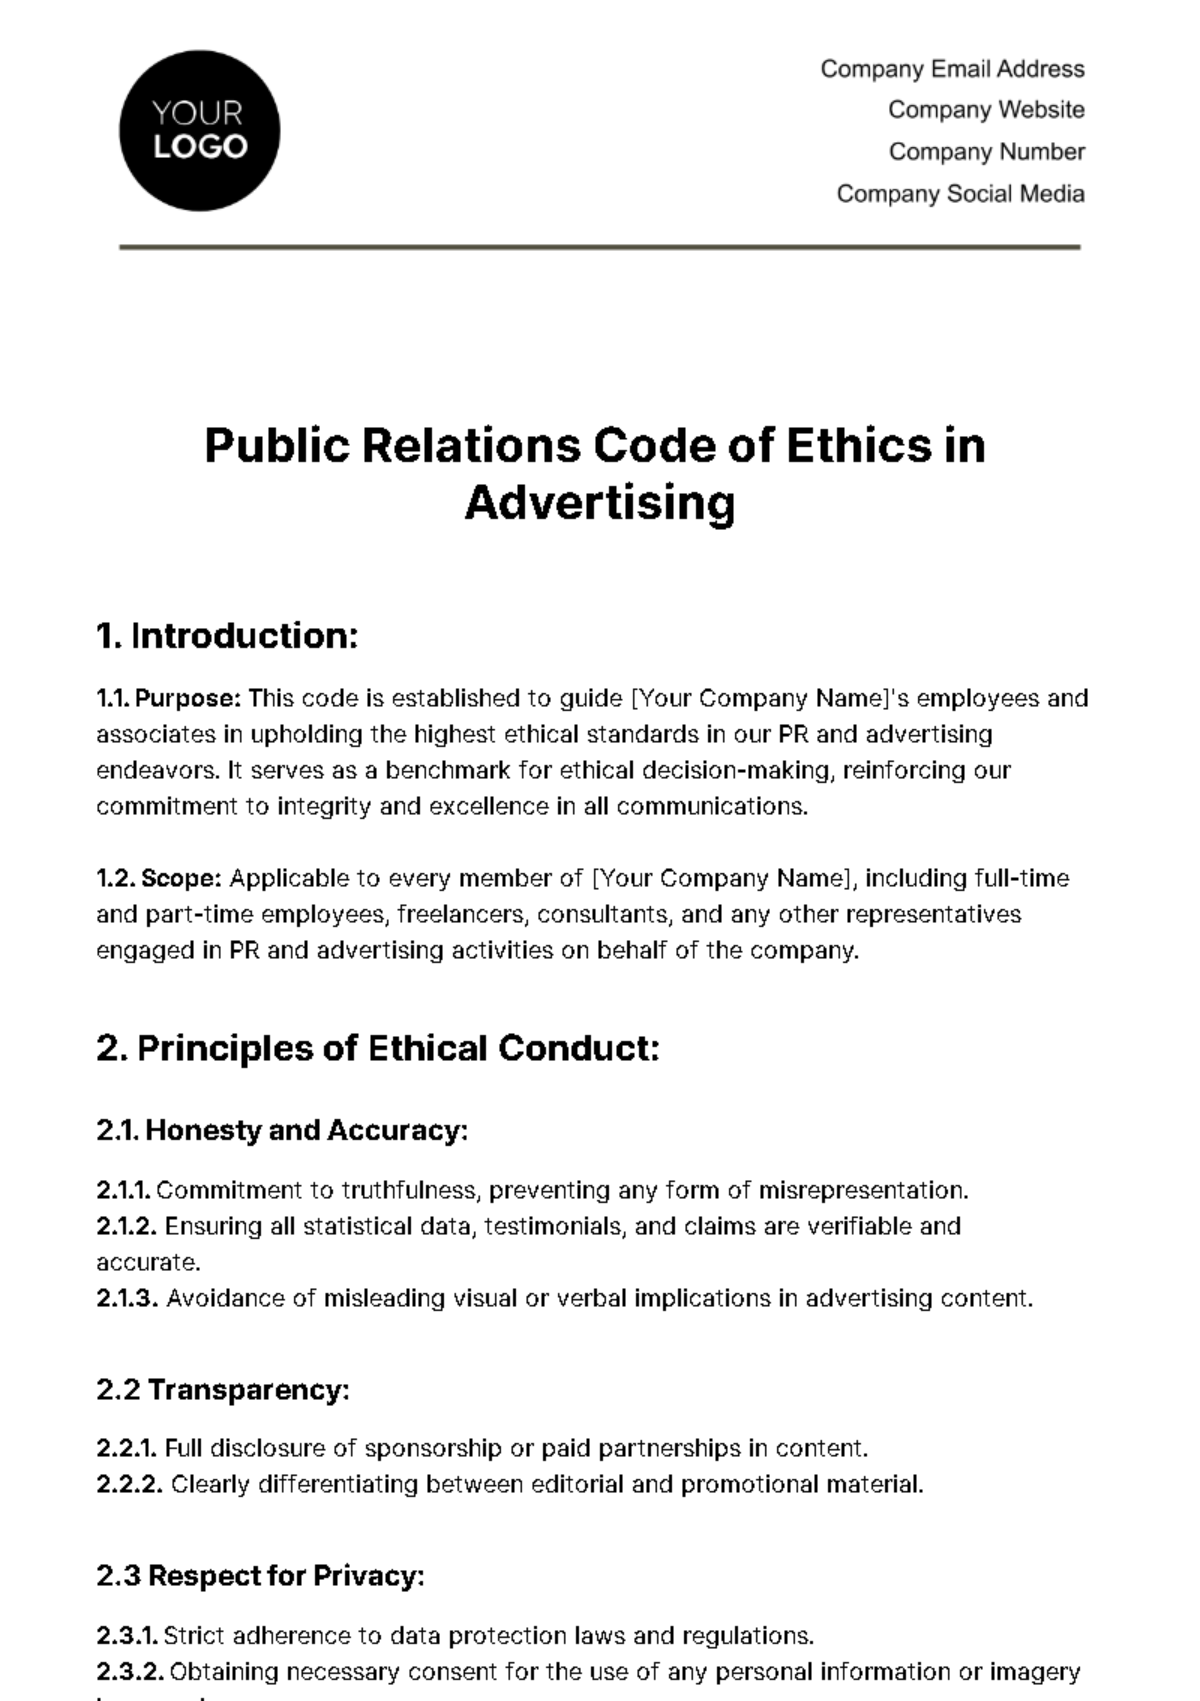 Free Public Relations Code of Ethics in Advertising Template